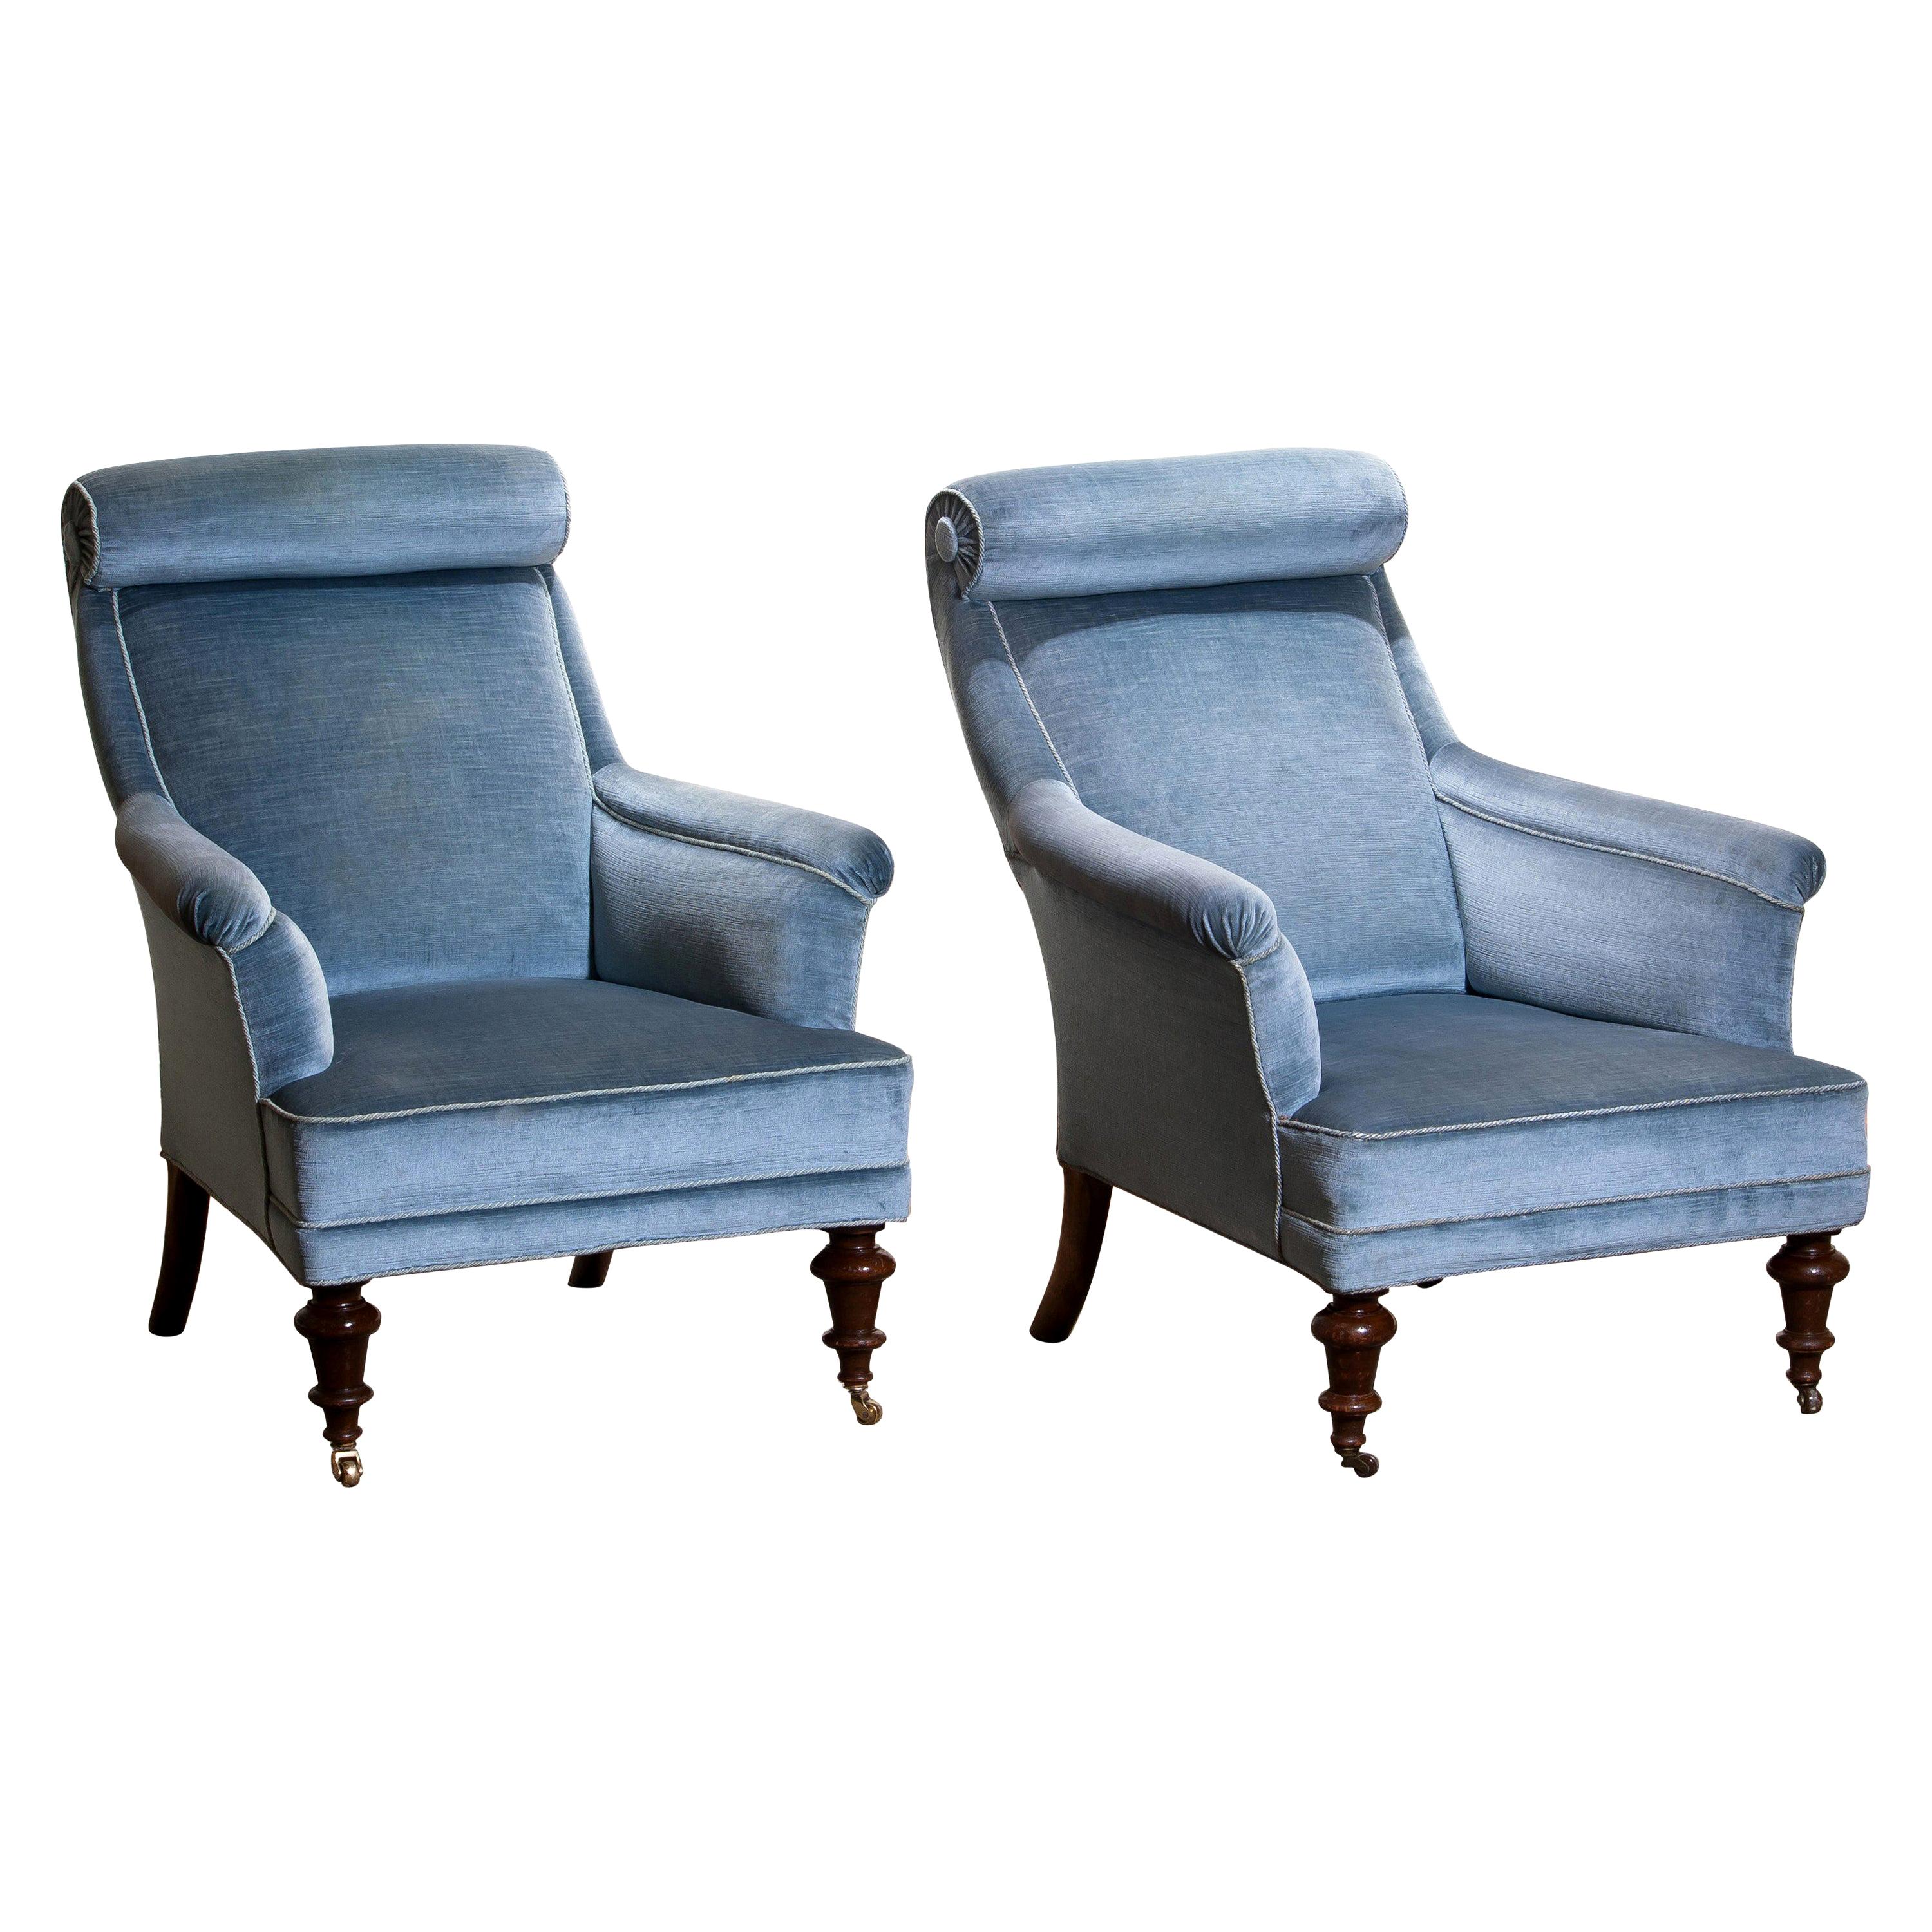 Rare and extremely comfortable / beautiful set of two bergere / lounge chairs in Dorothy Draper style from the turn to the 20th century.
Both chairs are upholstered in ice blue velvet and in good condition..

One chair has new wheels in brass and